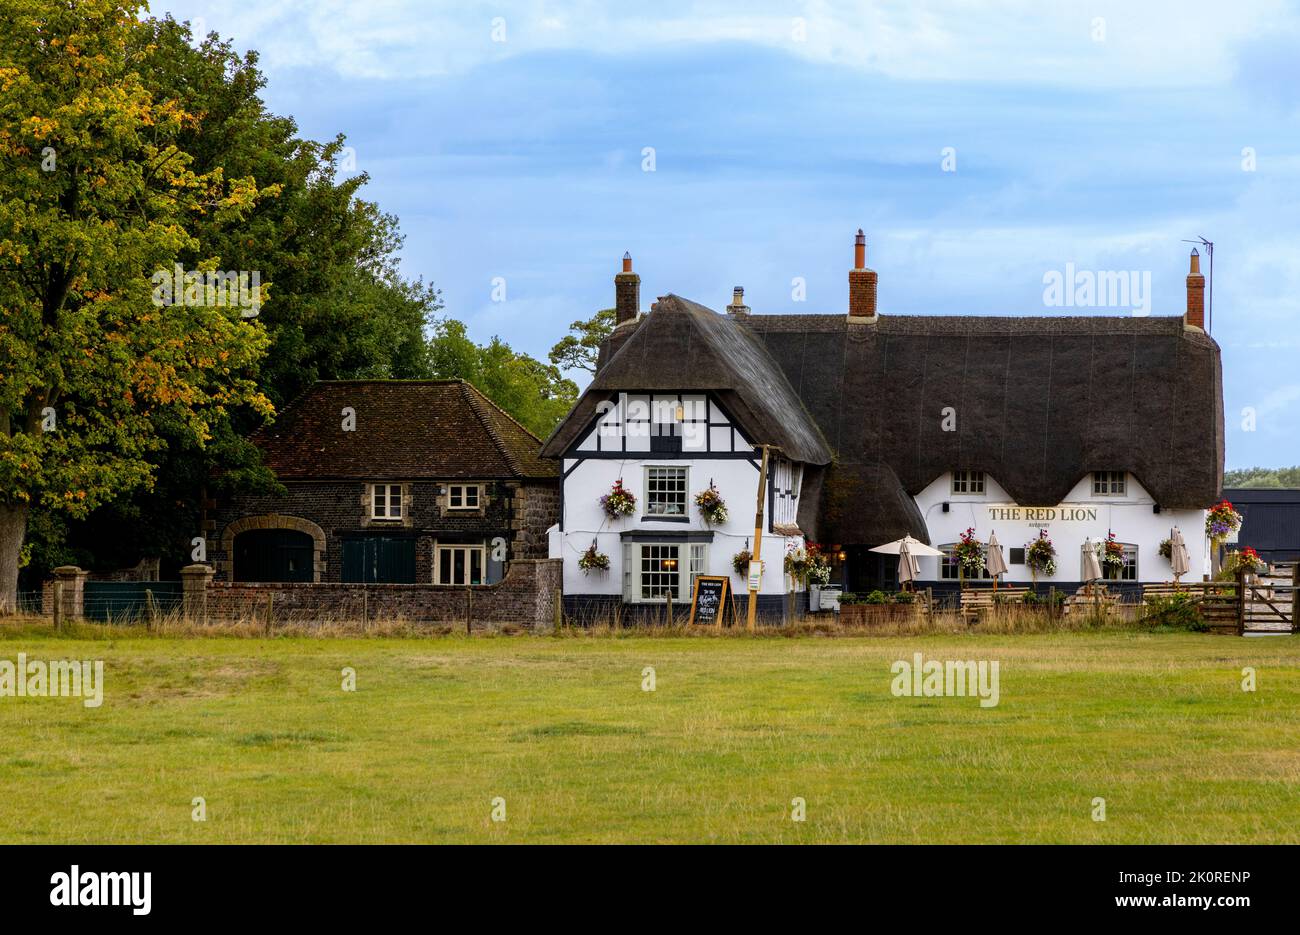 The Red Lion Pub, an ancient public house opposite Avebury Stone Circle, Wiltshire, England, Great Britain, United Kingdom, Europe. Stock Photo